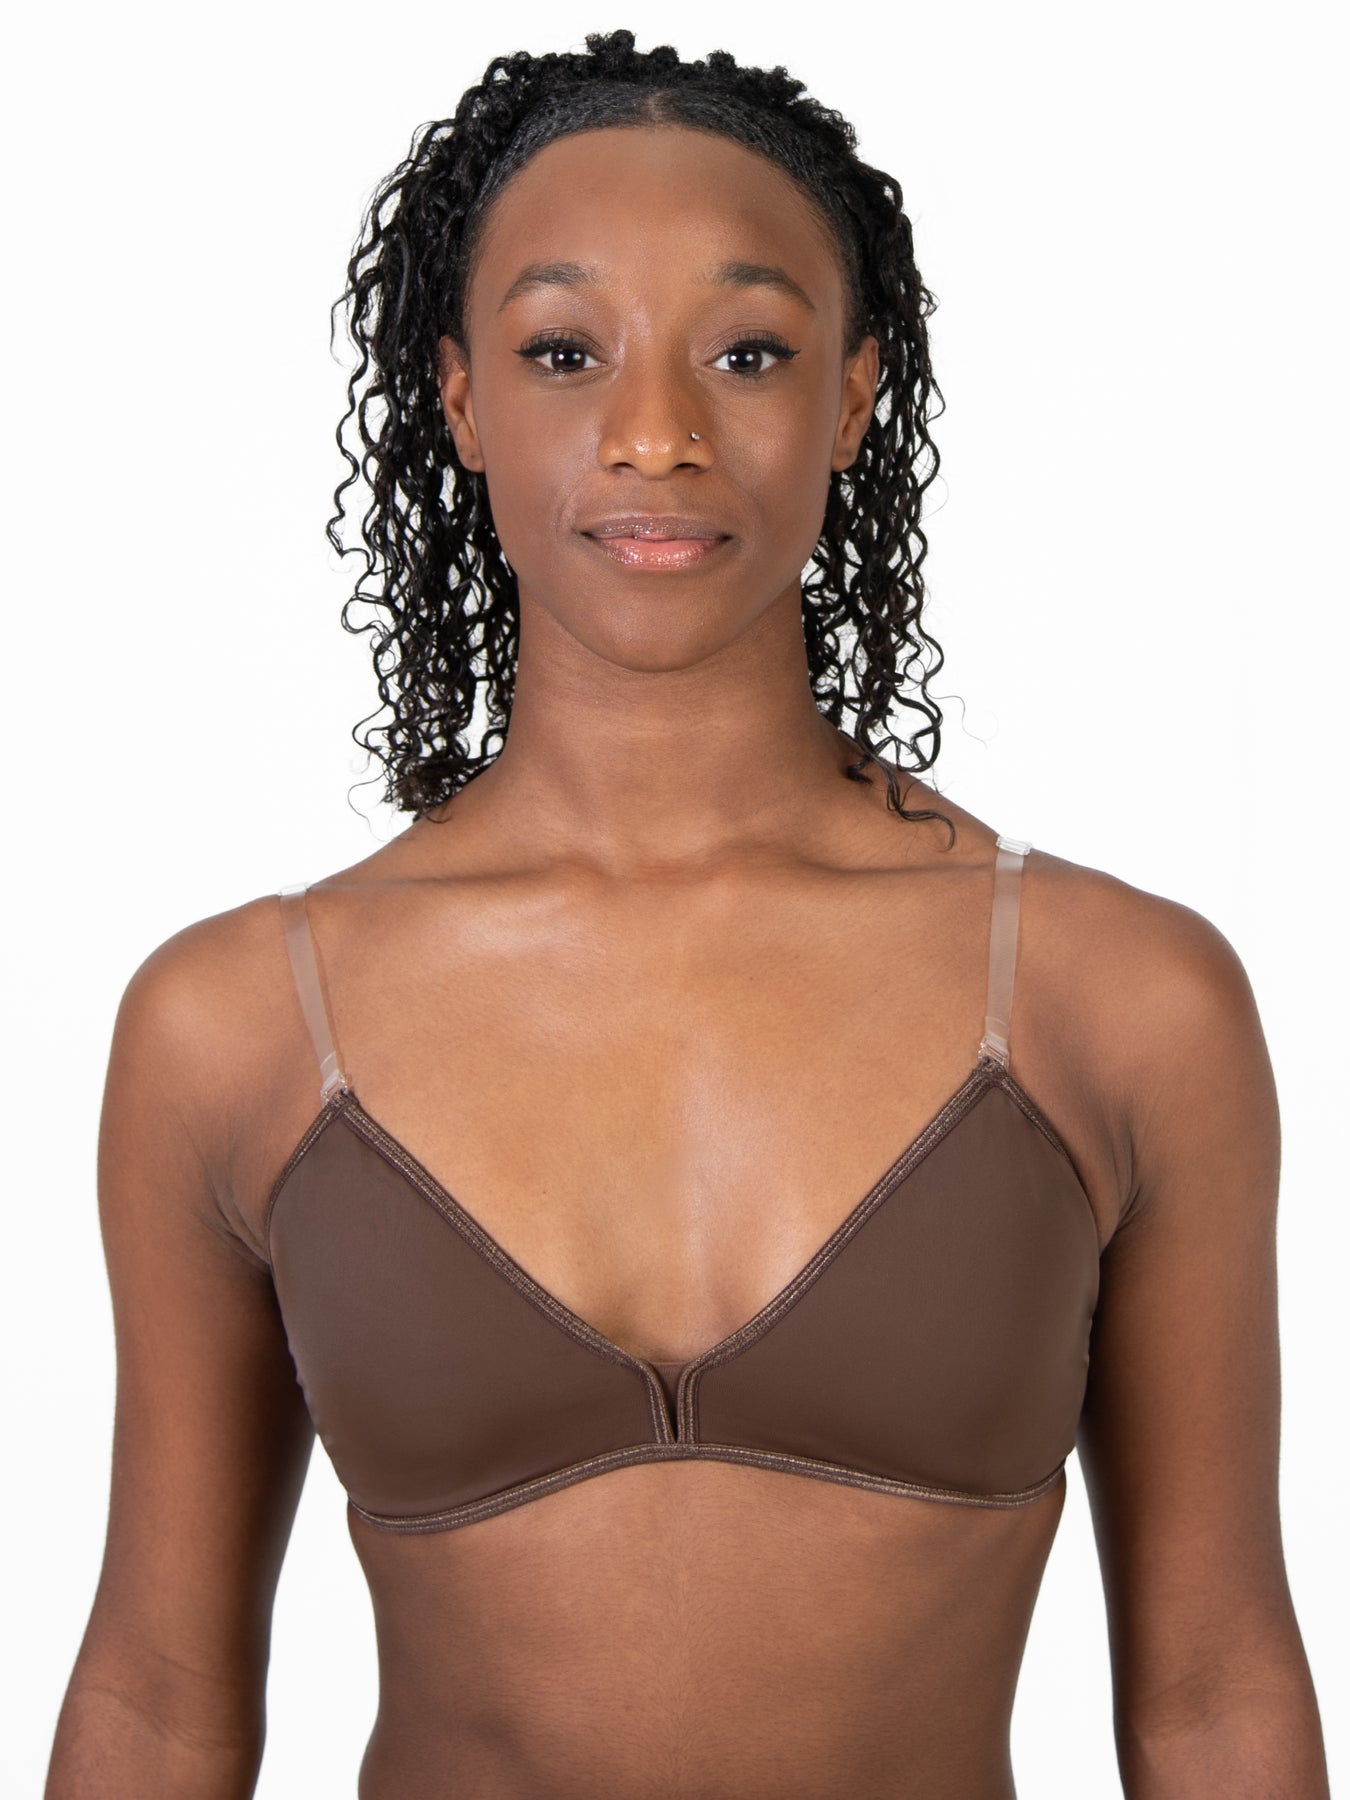 BODY WRAPPERS UNDERWRAPS PADDED CLEAR BACK BRA - ADULT #287